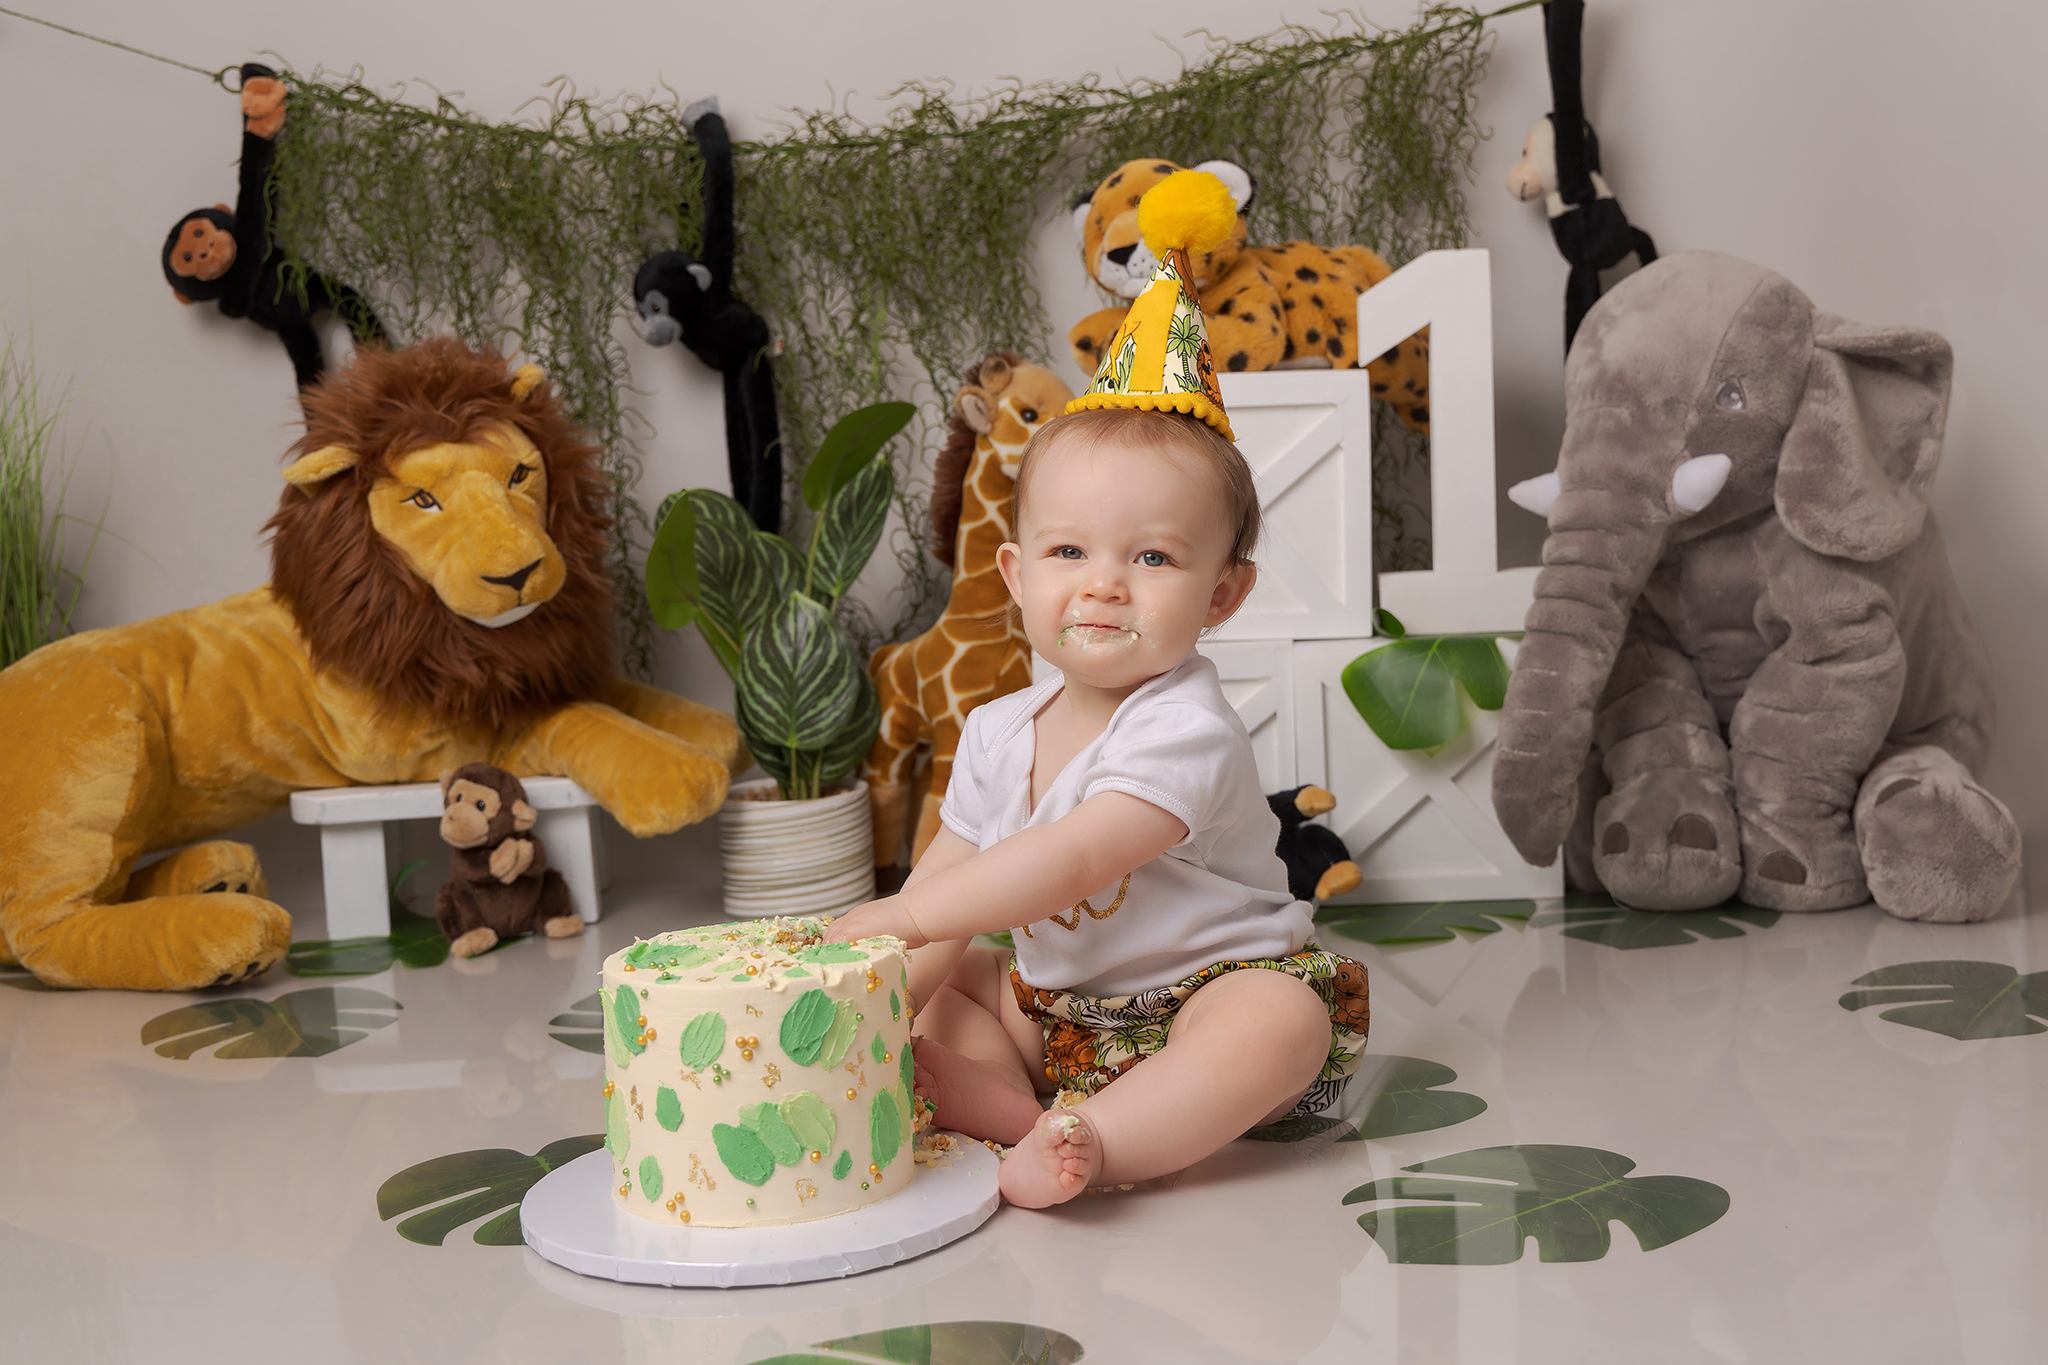 One year old with a jungle themed cake smash set about to break open into her cake